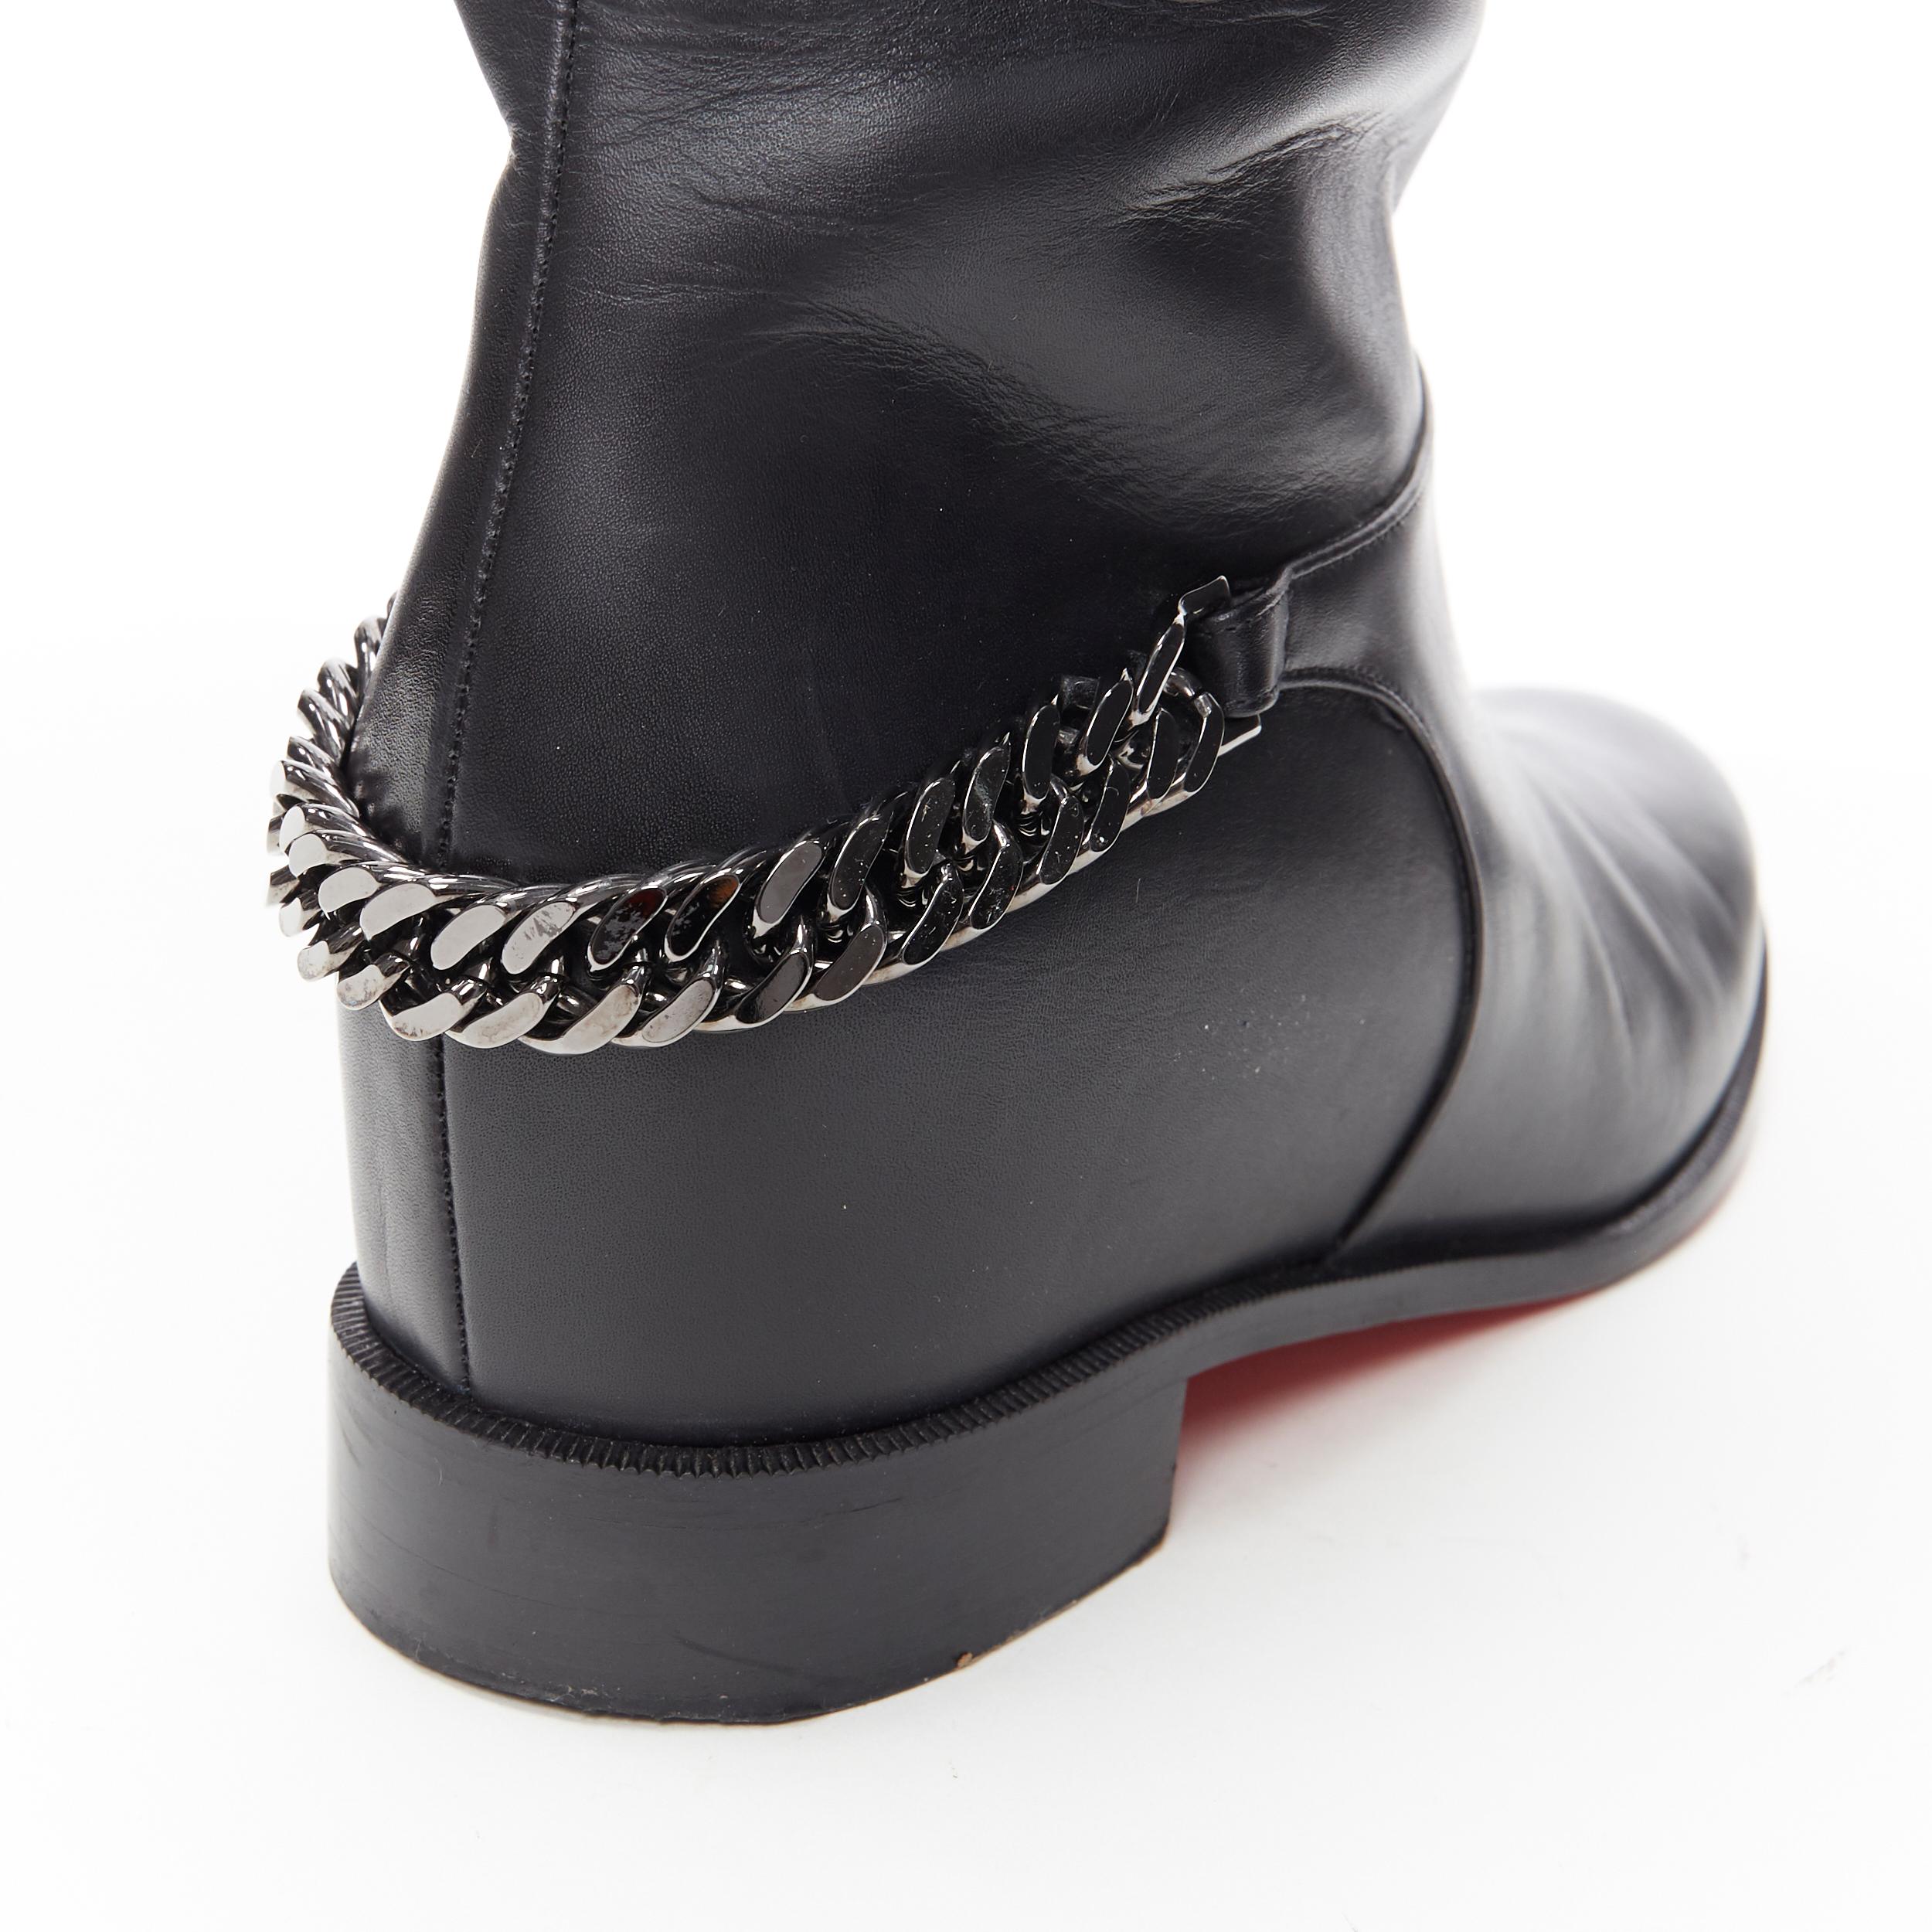 CHRISTIAN LOUBOUTIN Cate black leather silver chain heel pull on tall boot EU39 
Reference: TGAS/A04117 
Brand: Christian Louboutin 
Designer: Christian Louboutin 
Material: Leather 
Color: Black 
Pattern: Solid 
Closure: Pull on 
Made in: Italy